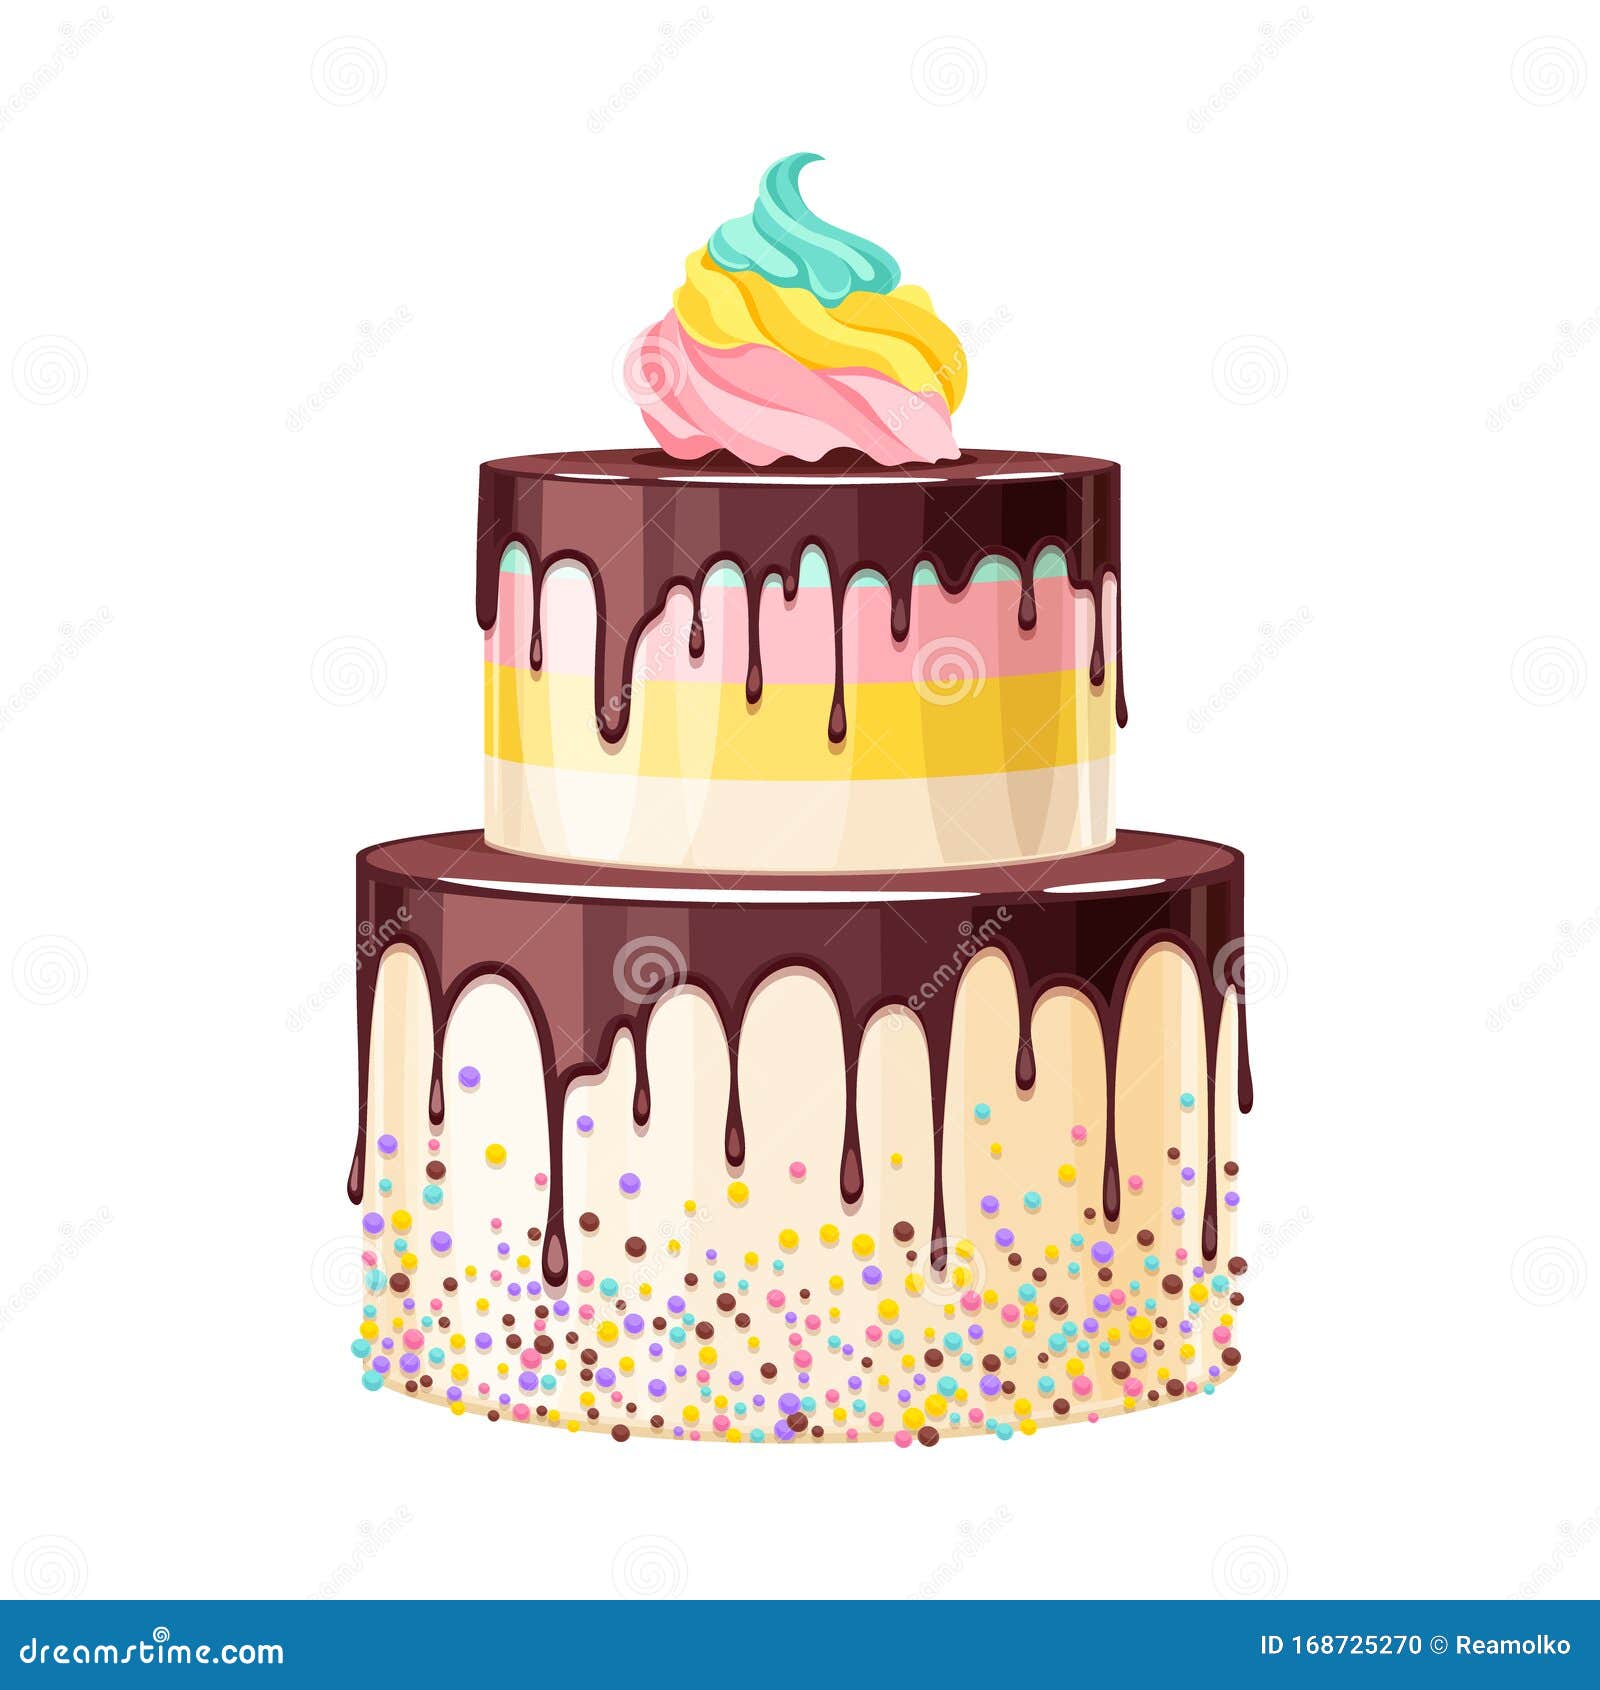 colorful birthday cake decorated with melted chocolate  .